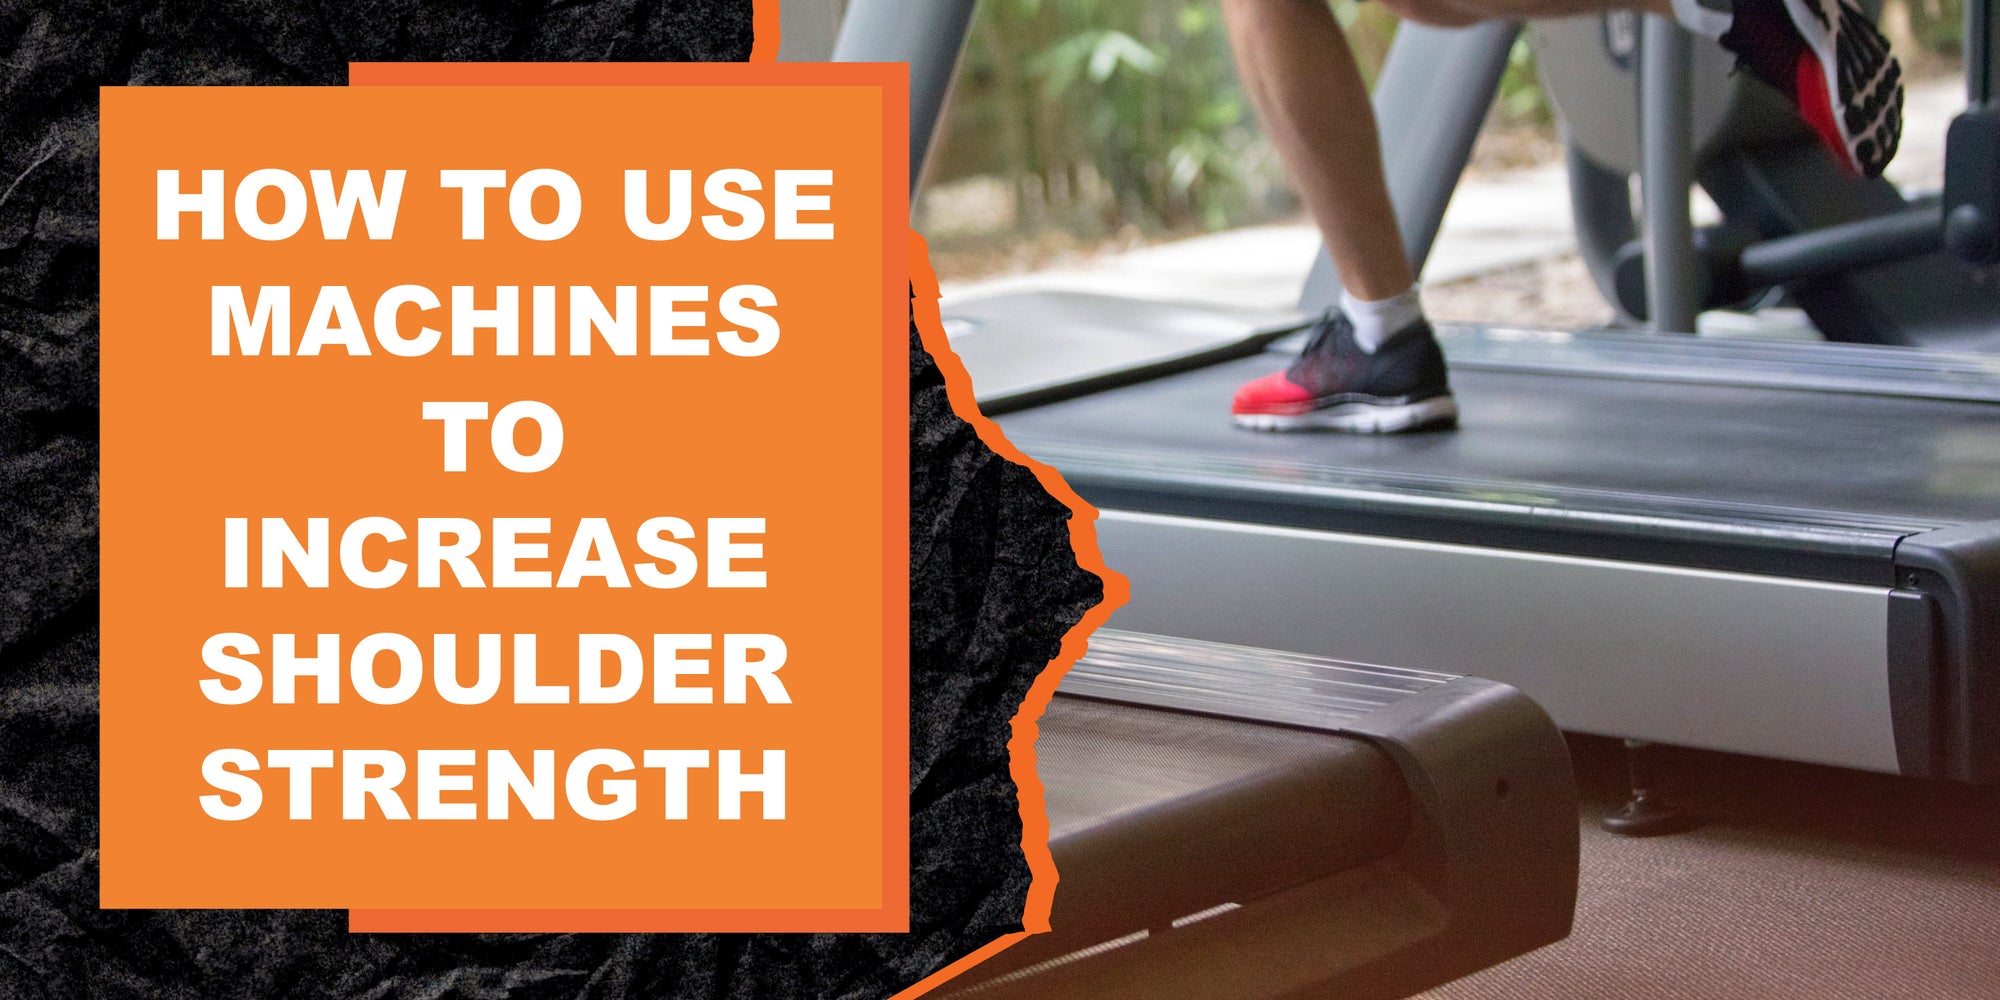 How to Use Machines to Increase Shoulder Strength